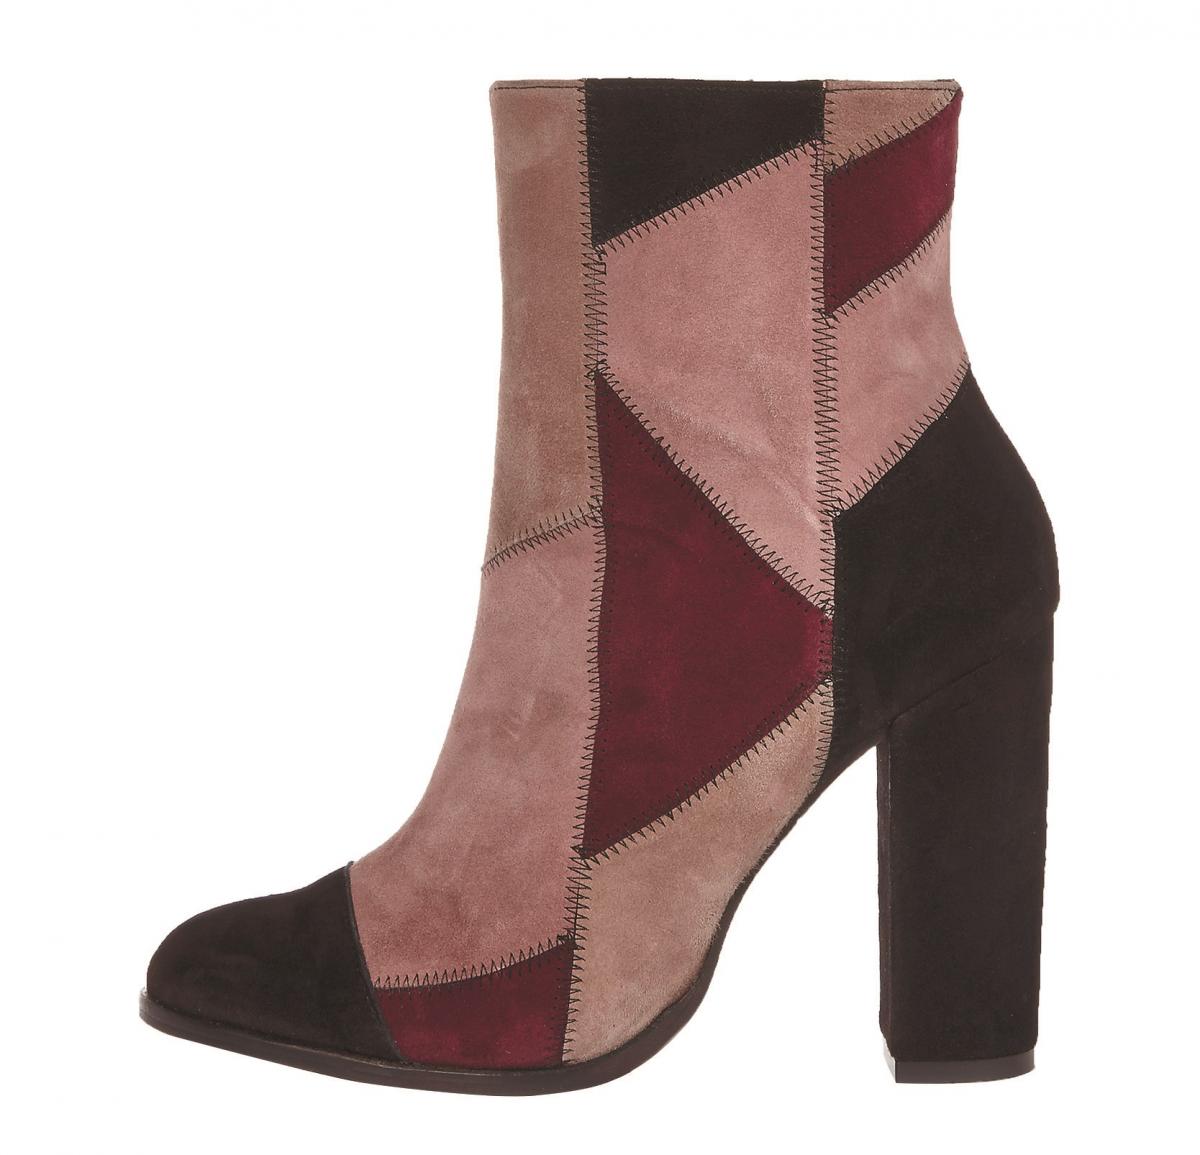 River Island, Suede Patchwork Boots, £90